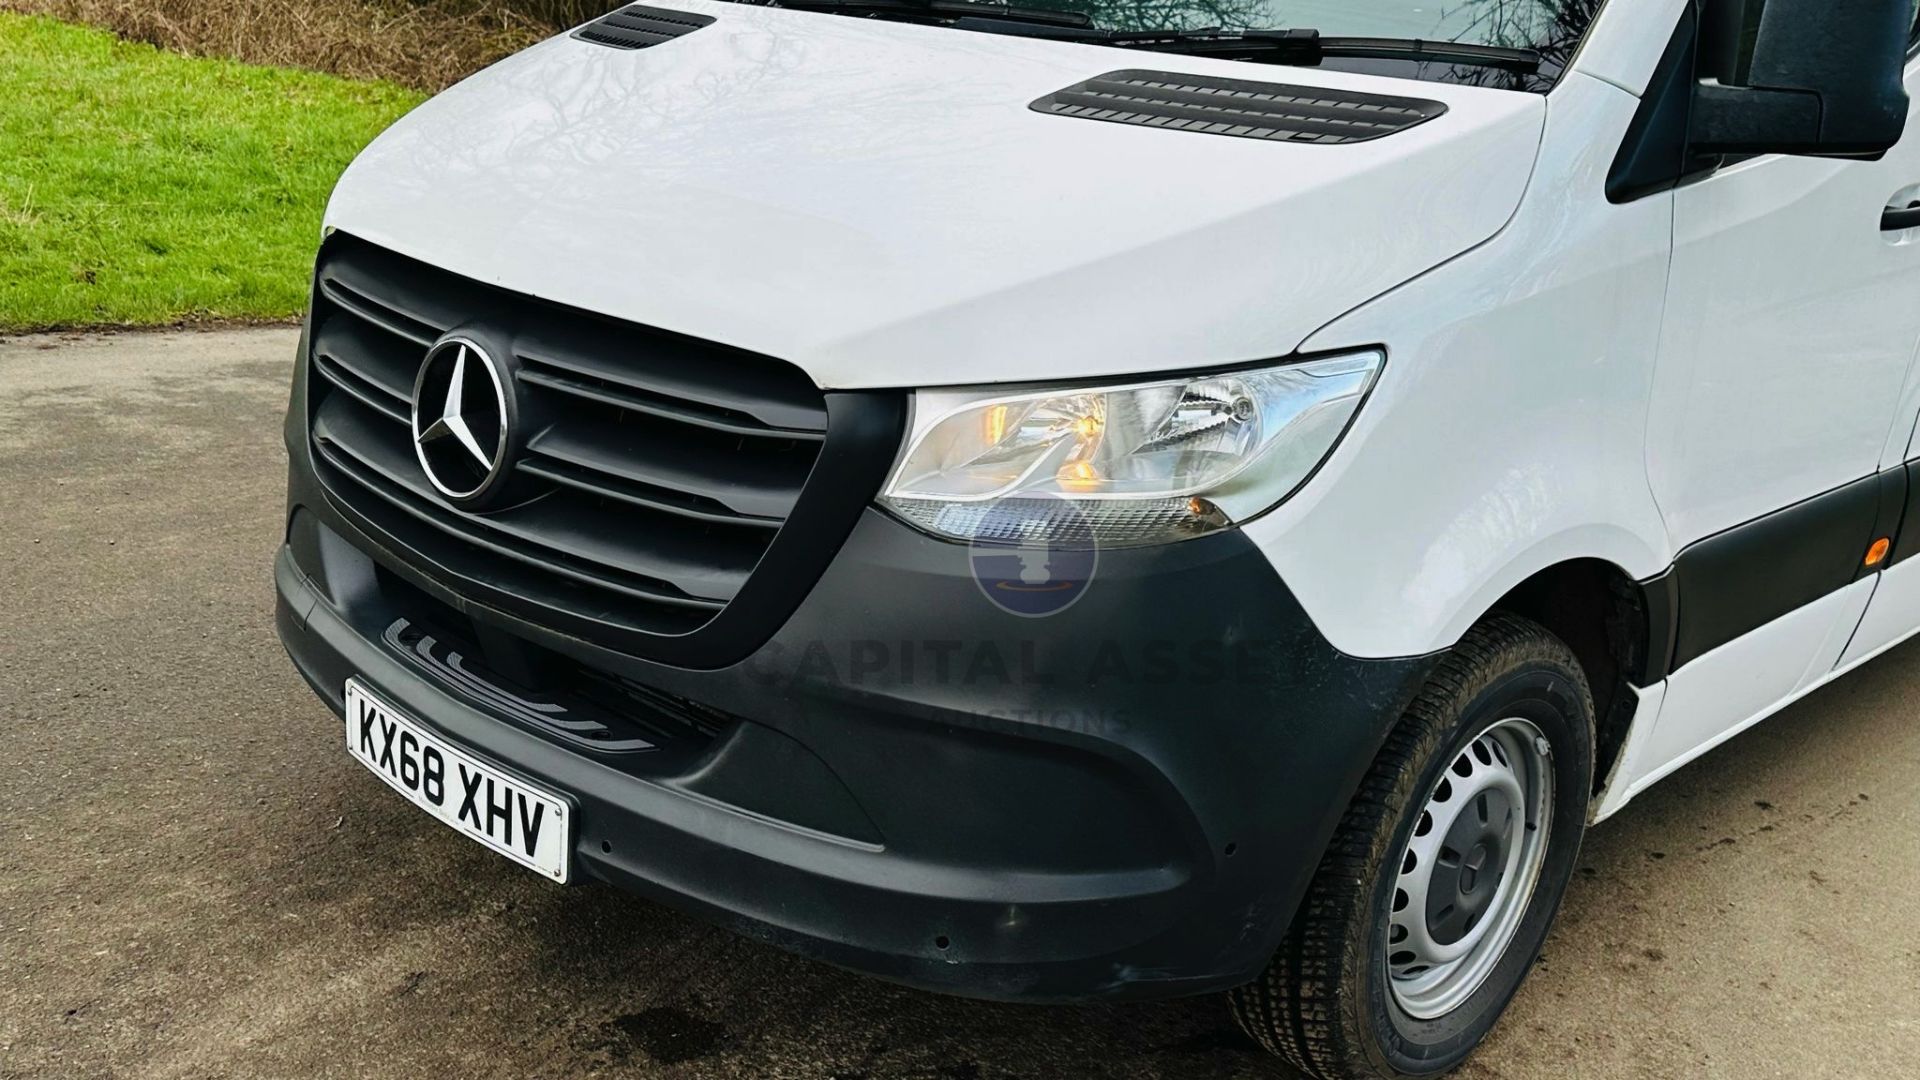 MERCEDES-BENZ SPRINTER 314 CDI *MWB - REFRIGERATED VAN* (2019 - FACELIFT MODEL) *OVERNIGHT STANDBY* - Image 6 of 41